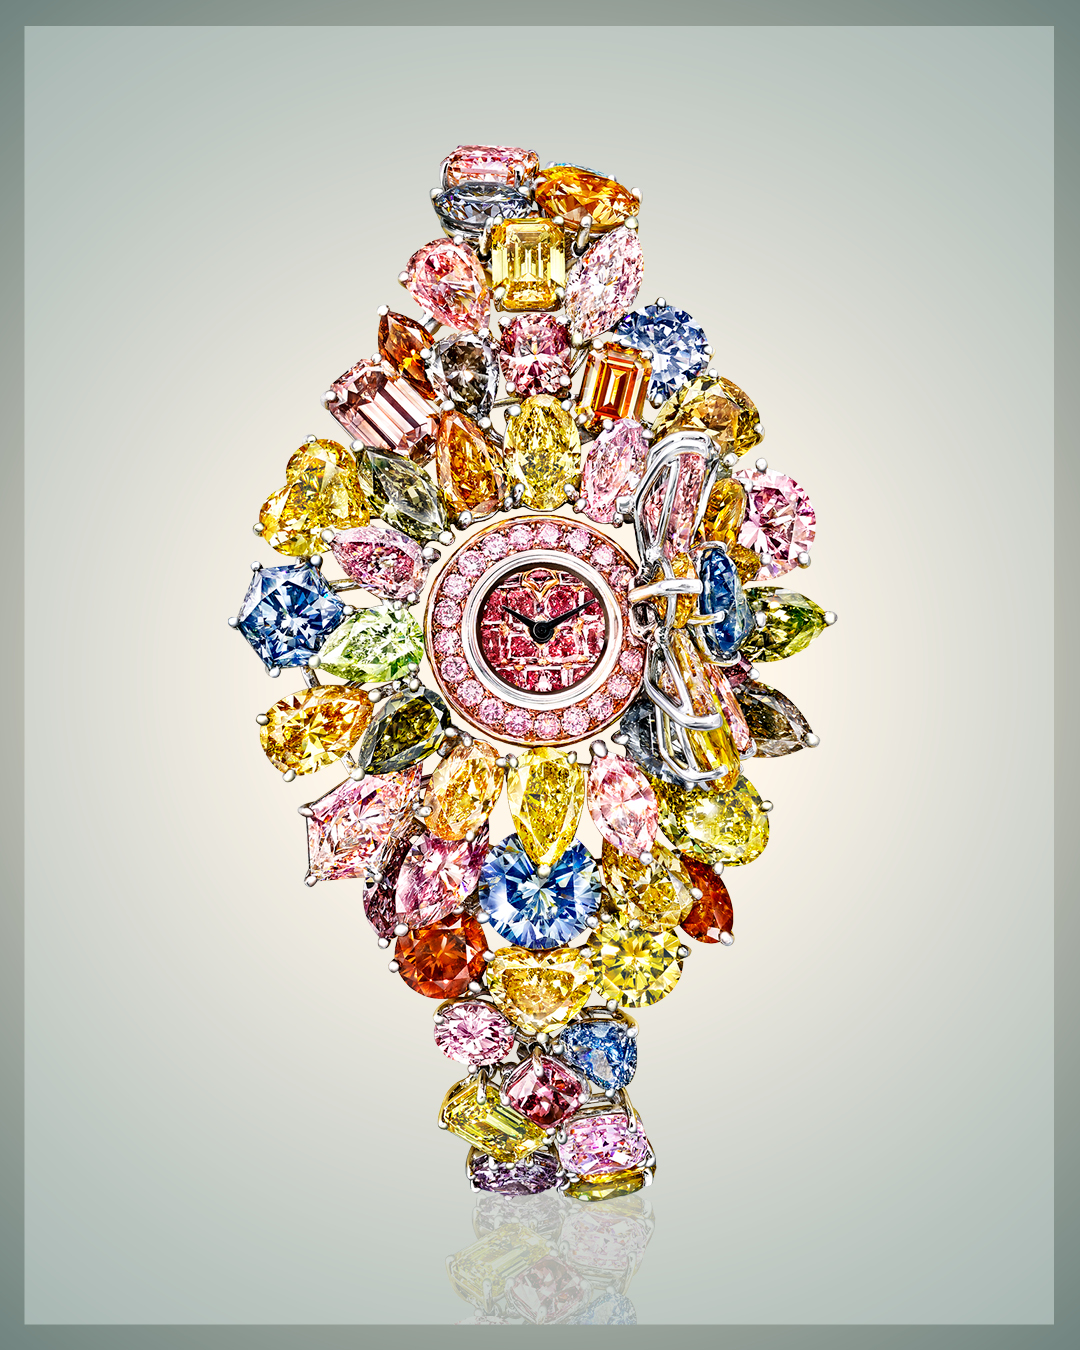 Graff Diamonds Hallucination watch featuring 110 carats worth of colored diamonds including a pink diamond face, and several different shades of blue diamonds, yellow diamonds, orange diamonds